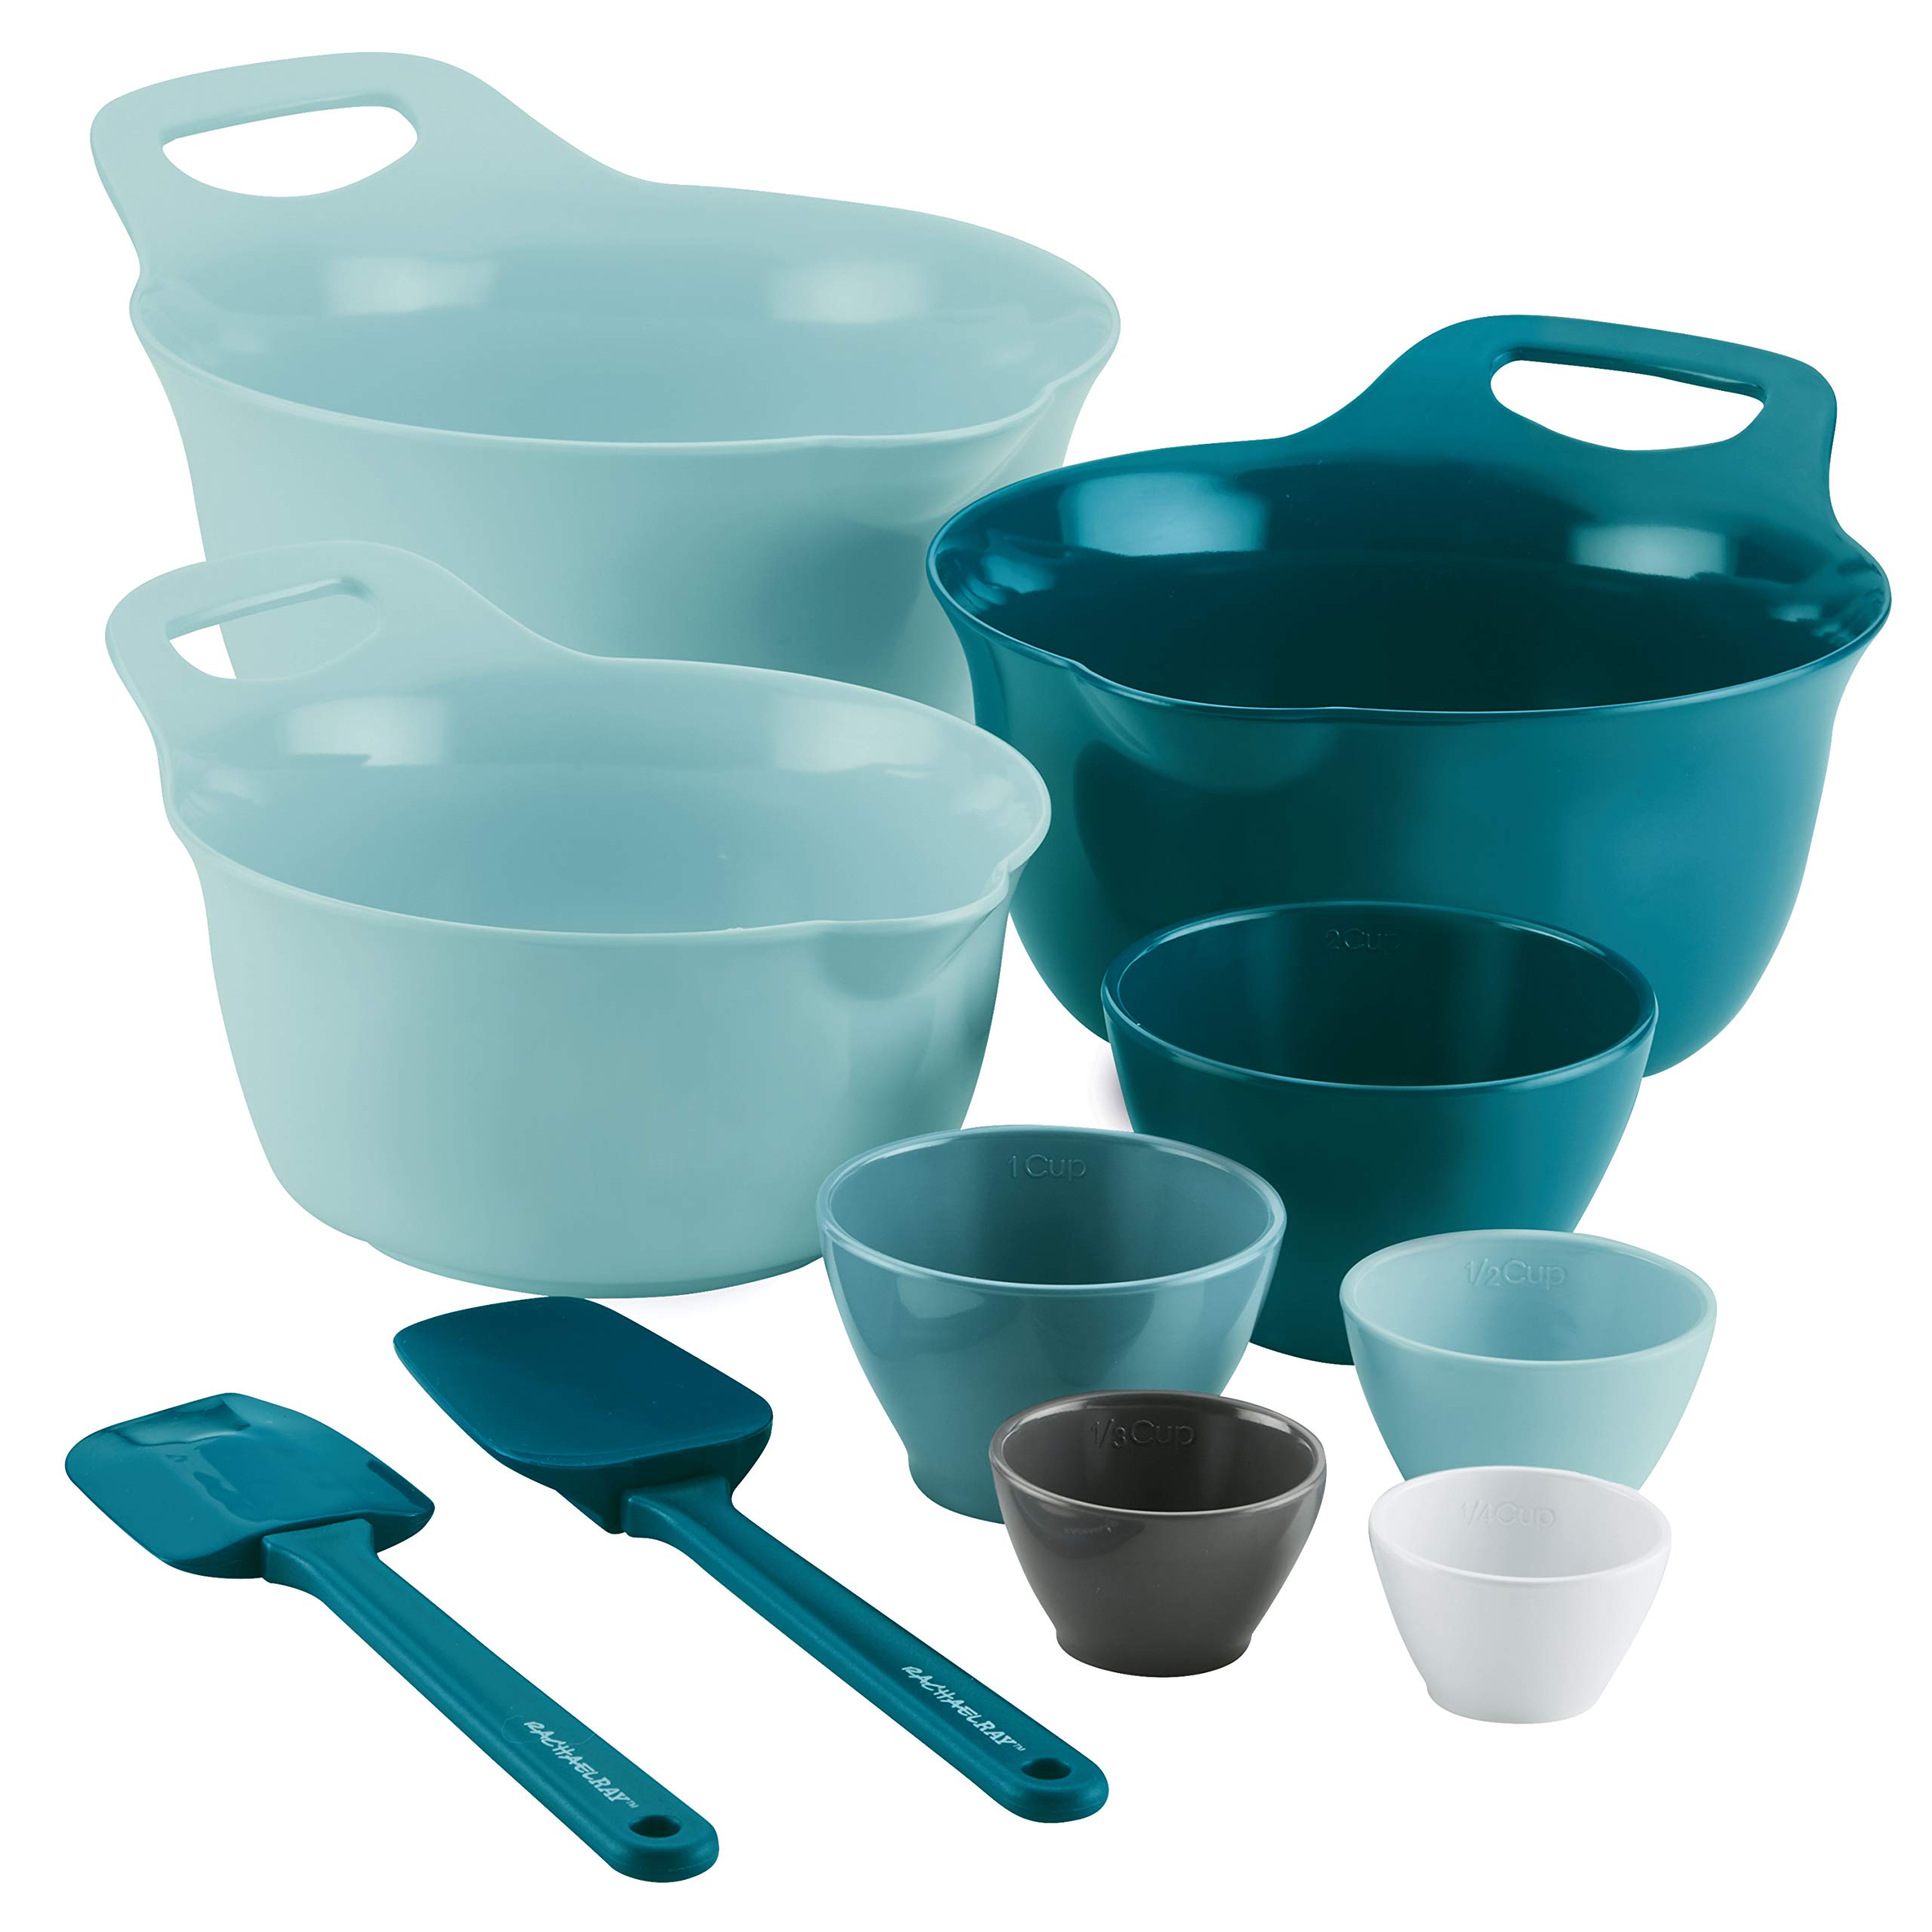 10-Pc Rachael Ray Cooking / Baking Prep Set w/ Mixing Bowls, Measuring Cups, & Tools (Light Blue and Teal)  $30 + Free Shipping w/ Prime or on $35+